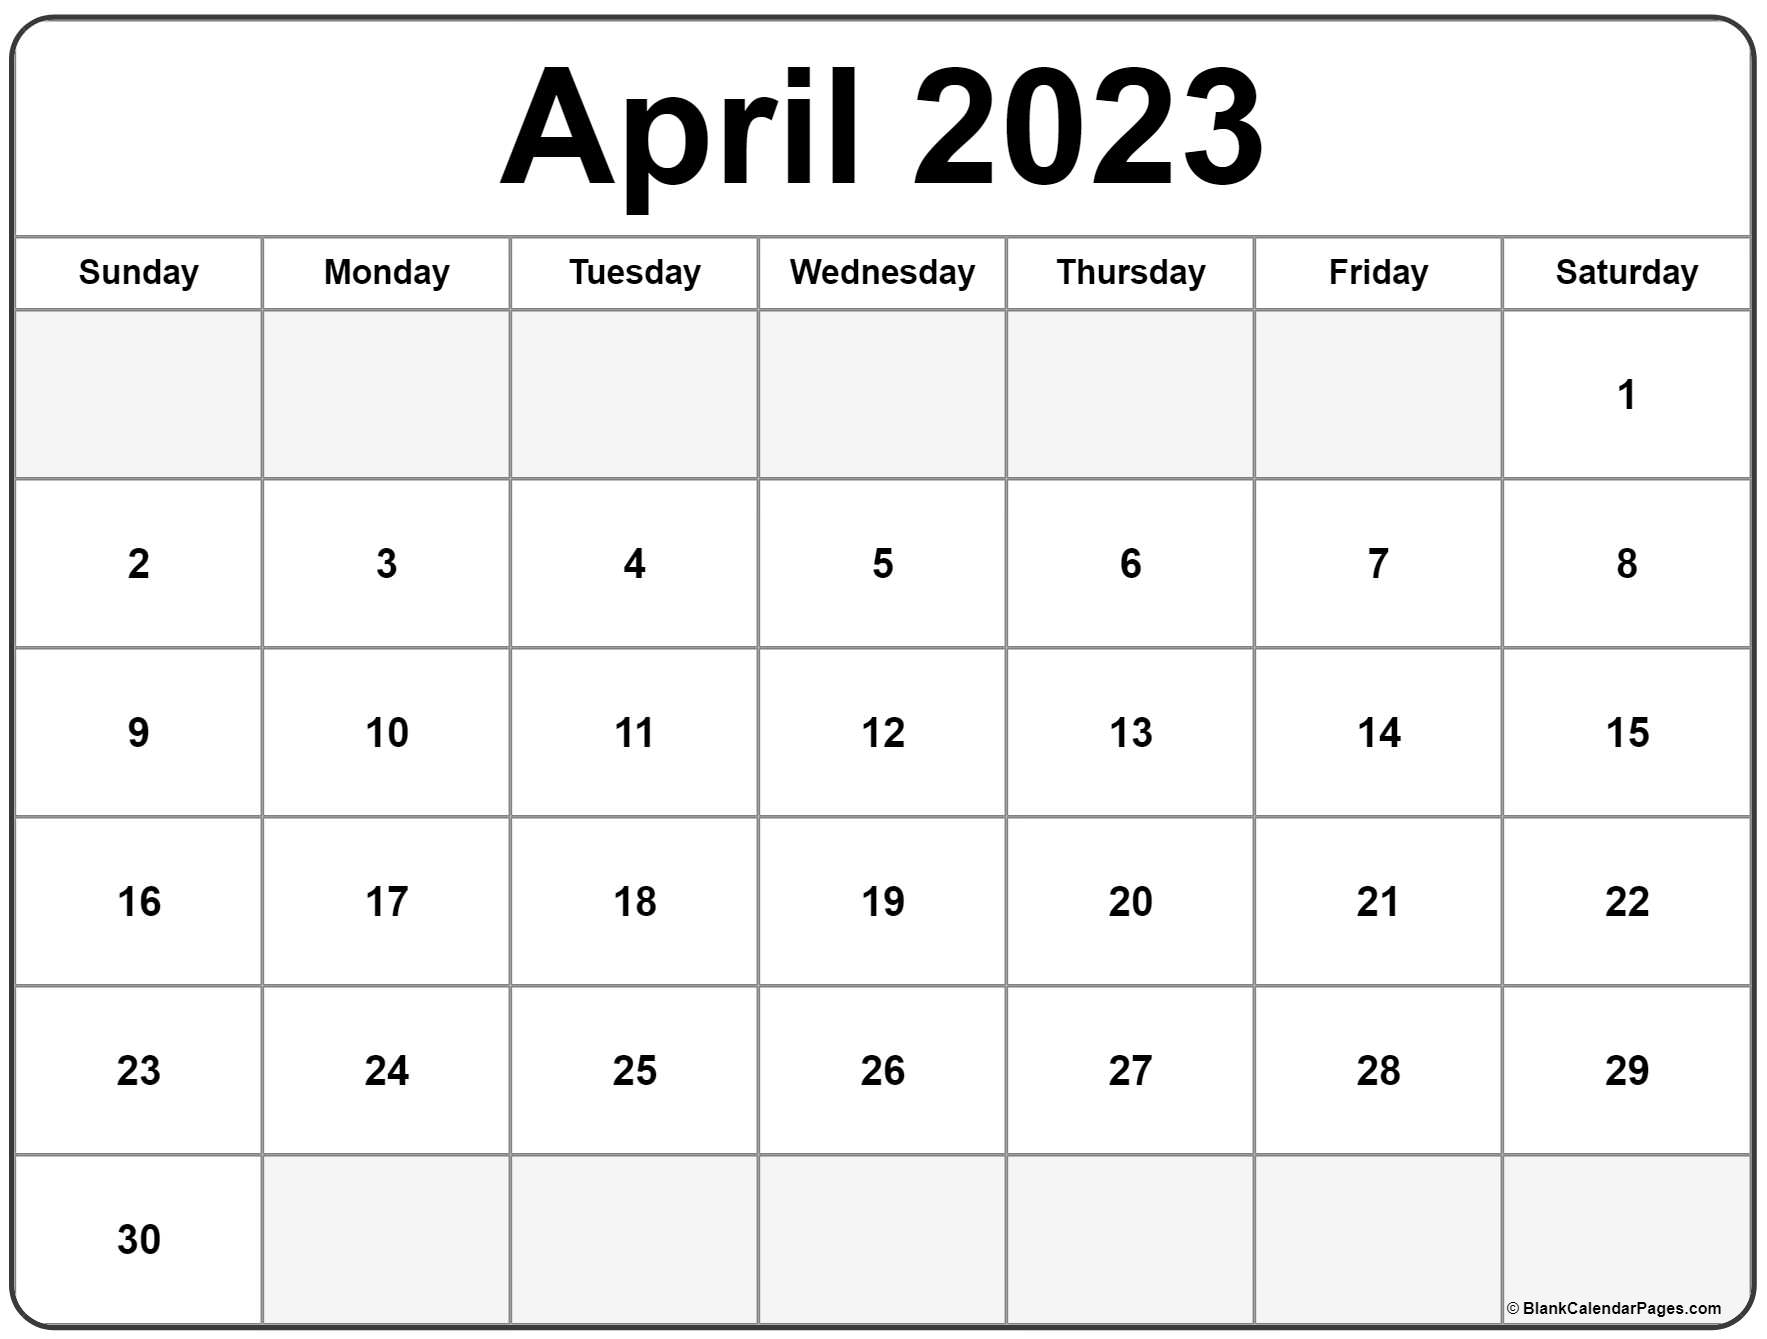 Get How Many Days In April 2023